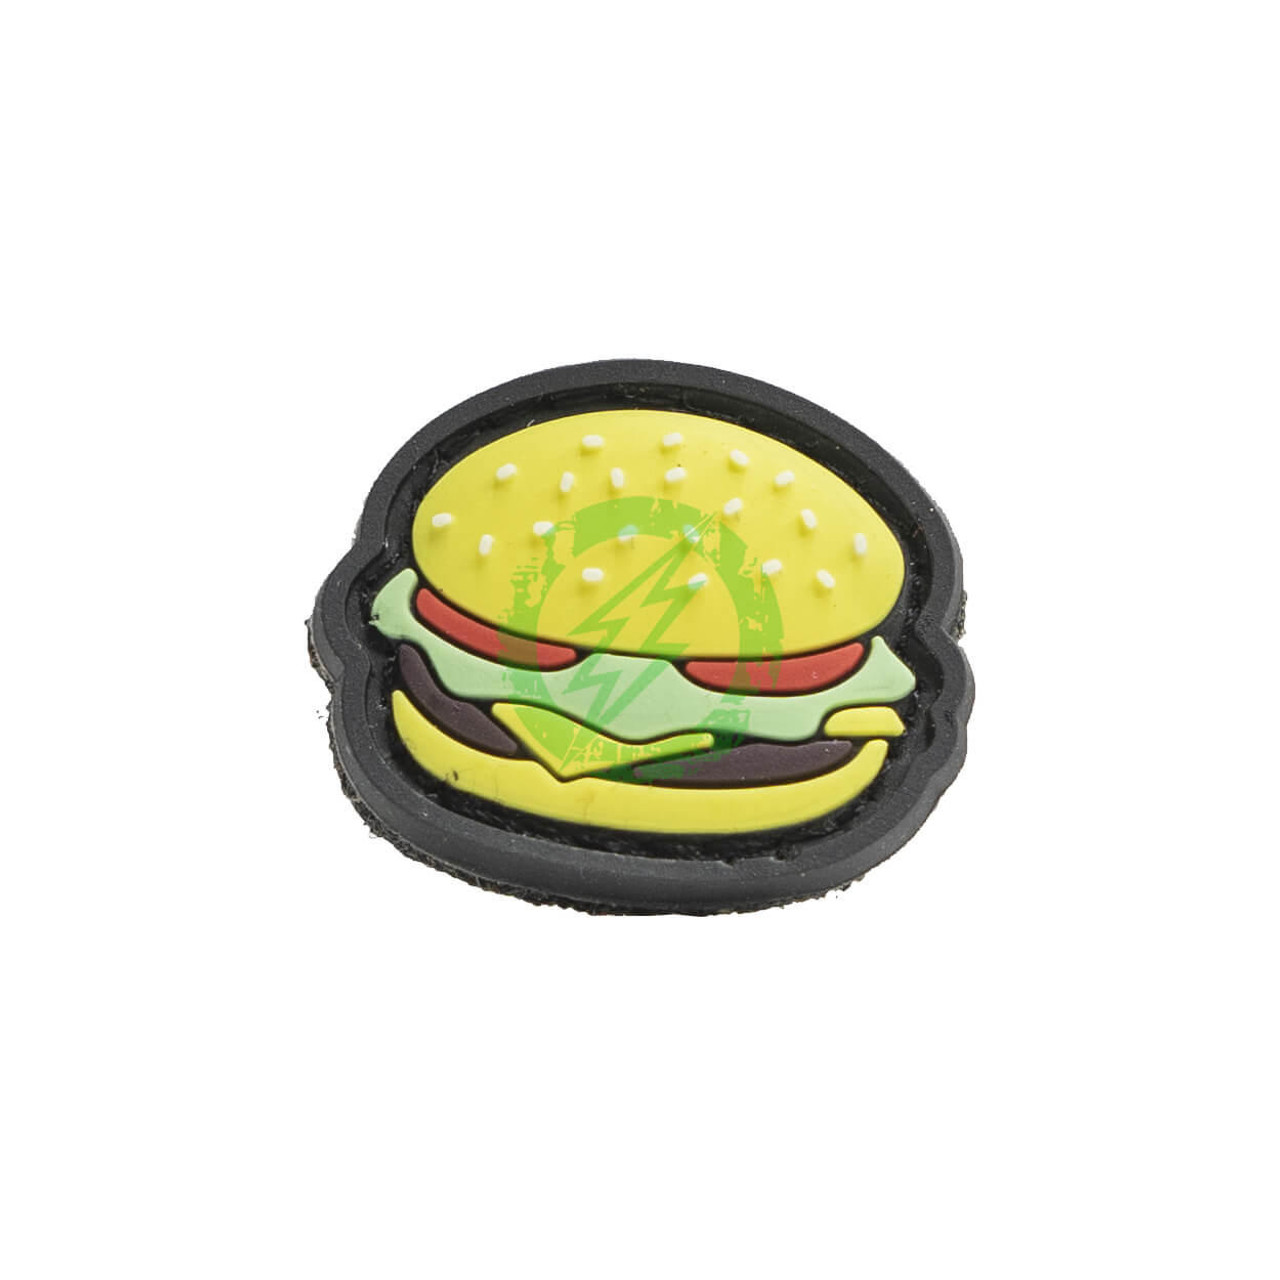  Tactical Outfitters Cheeseburger GITD PVC Cat Eye Morale Patch 